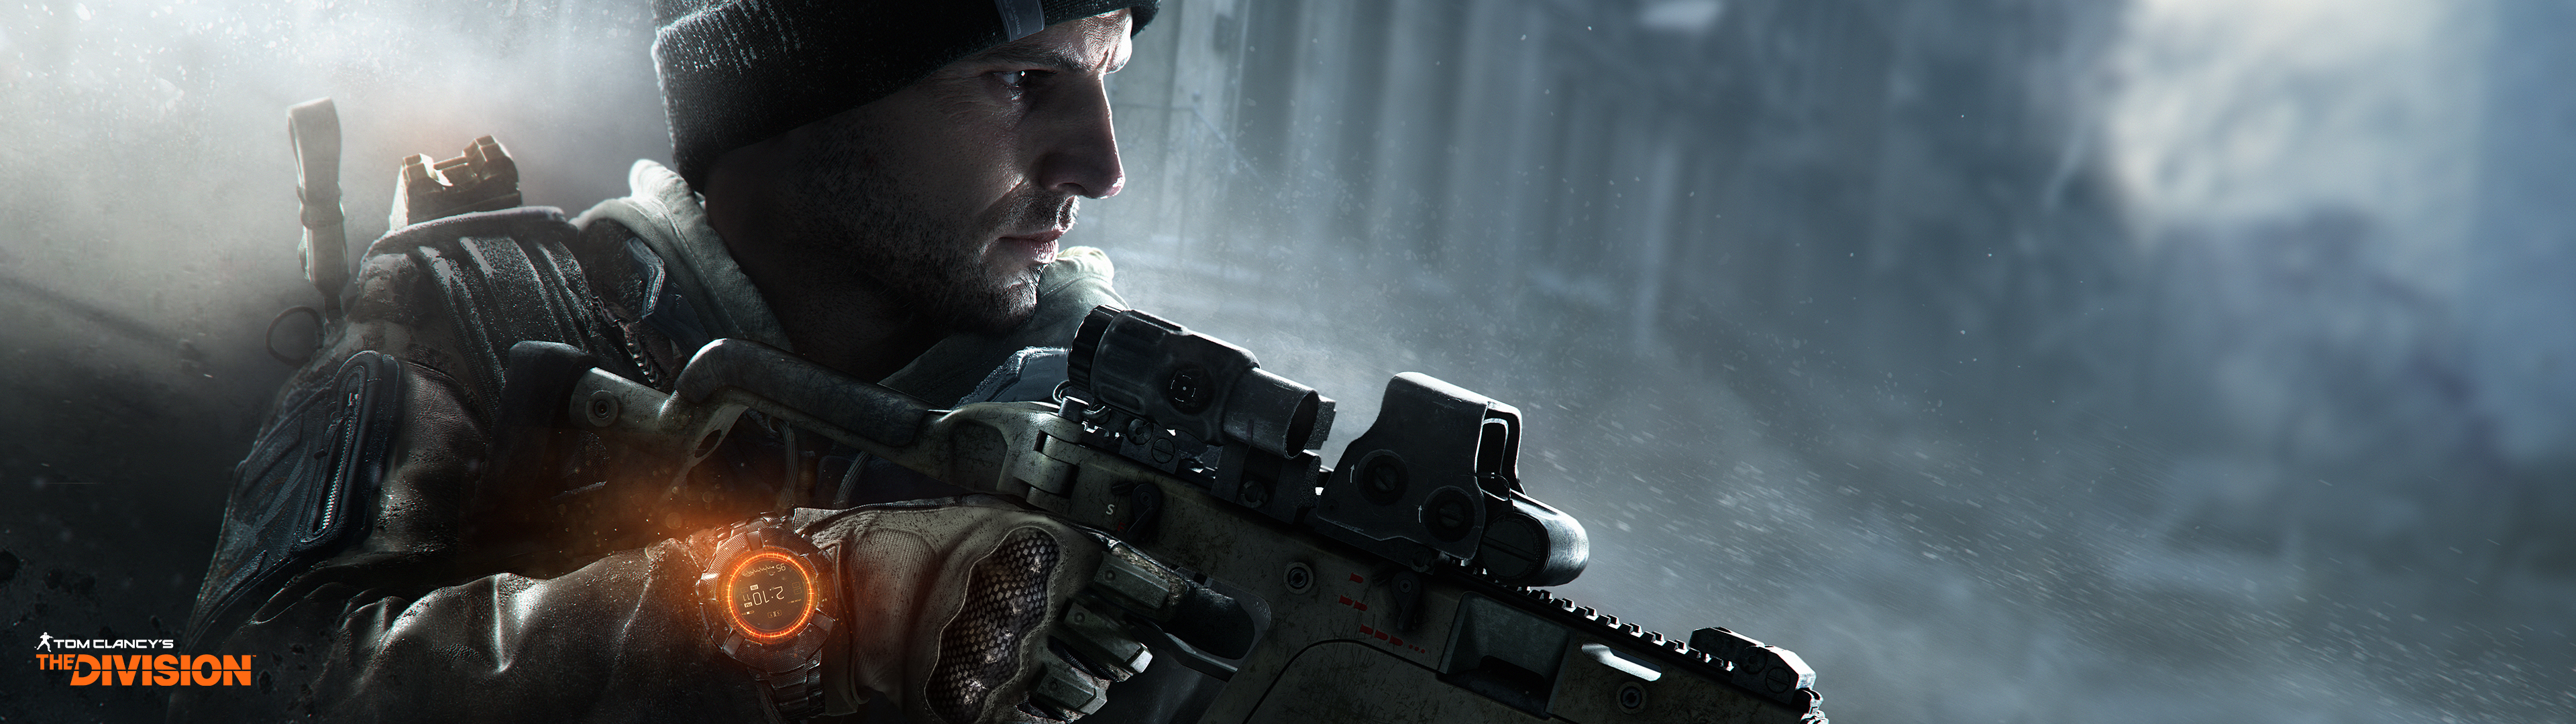 the division wallpaper,action adventure game,shooter game,soldier,pc game,movie